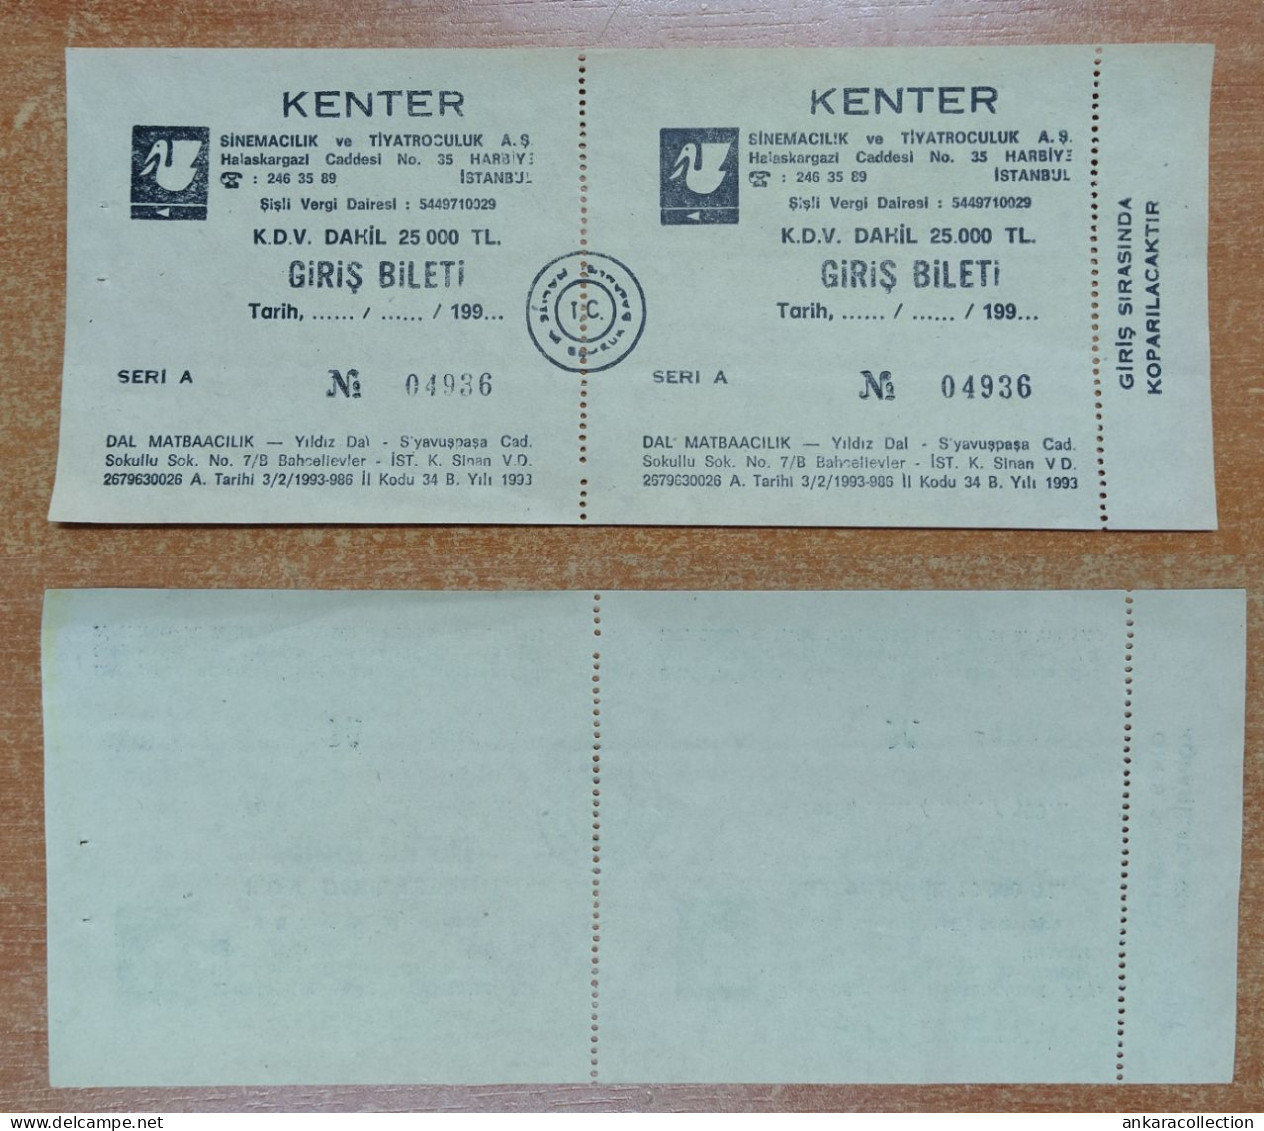 AC - KENTER  CINEMA & THEATER TICKET  1993  ISTANBUL TURKEY CONCERT TICKET WITH COUNTERFOIL - Tickets De Concerts